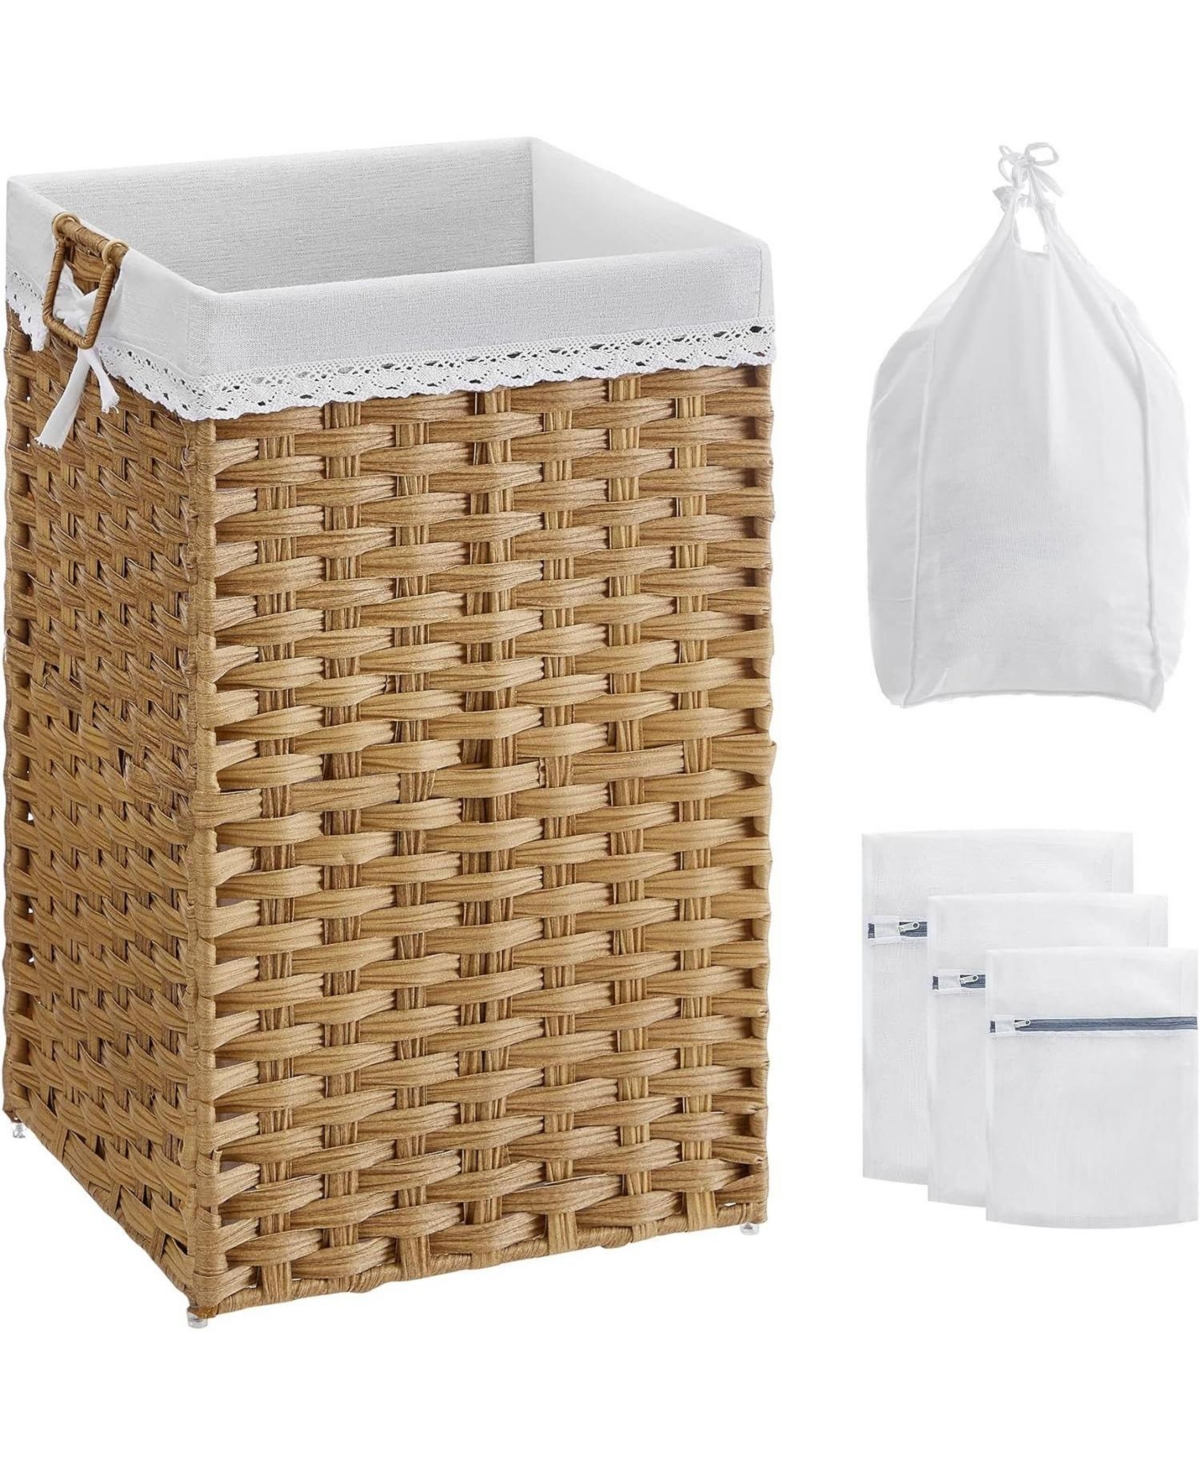 Laundry Hamper with 2 Removable Liner Bags & 3 Mesh Laundry Bags, 90L Sturdy Tall Laundry Bin - Natural